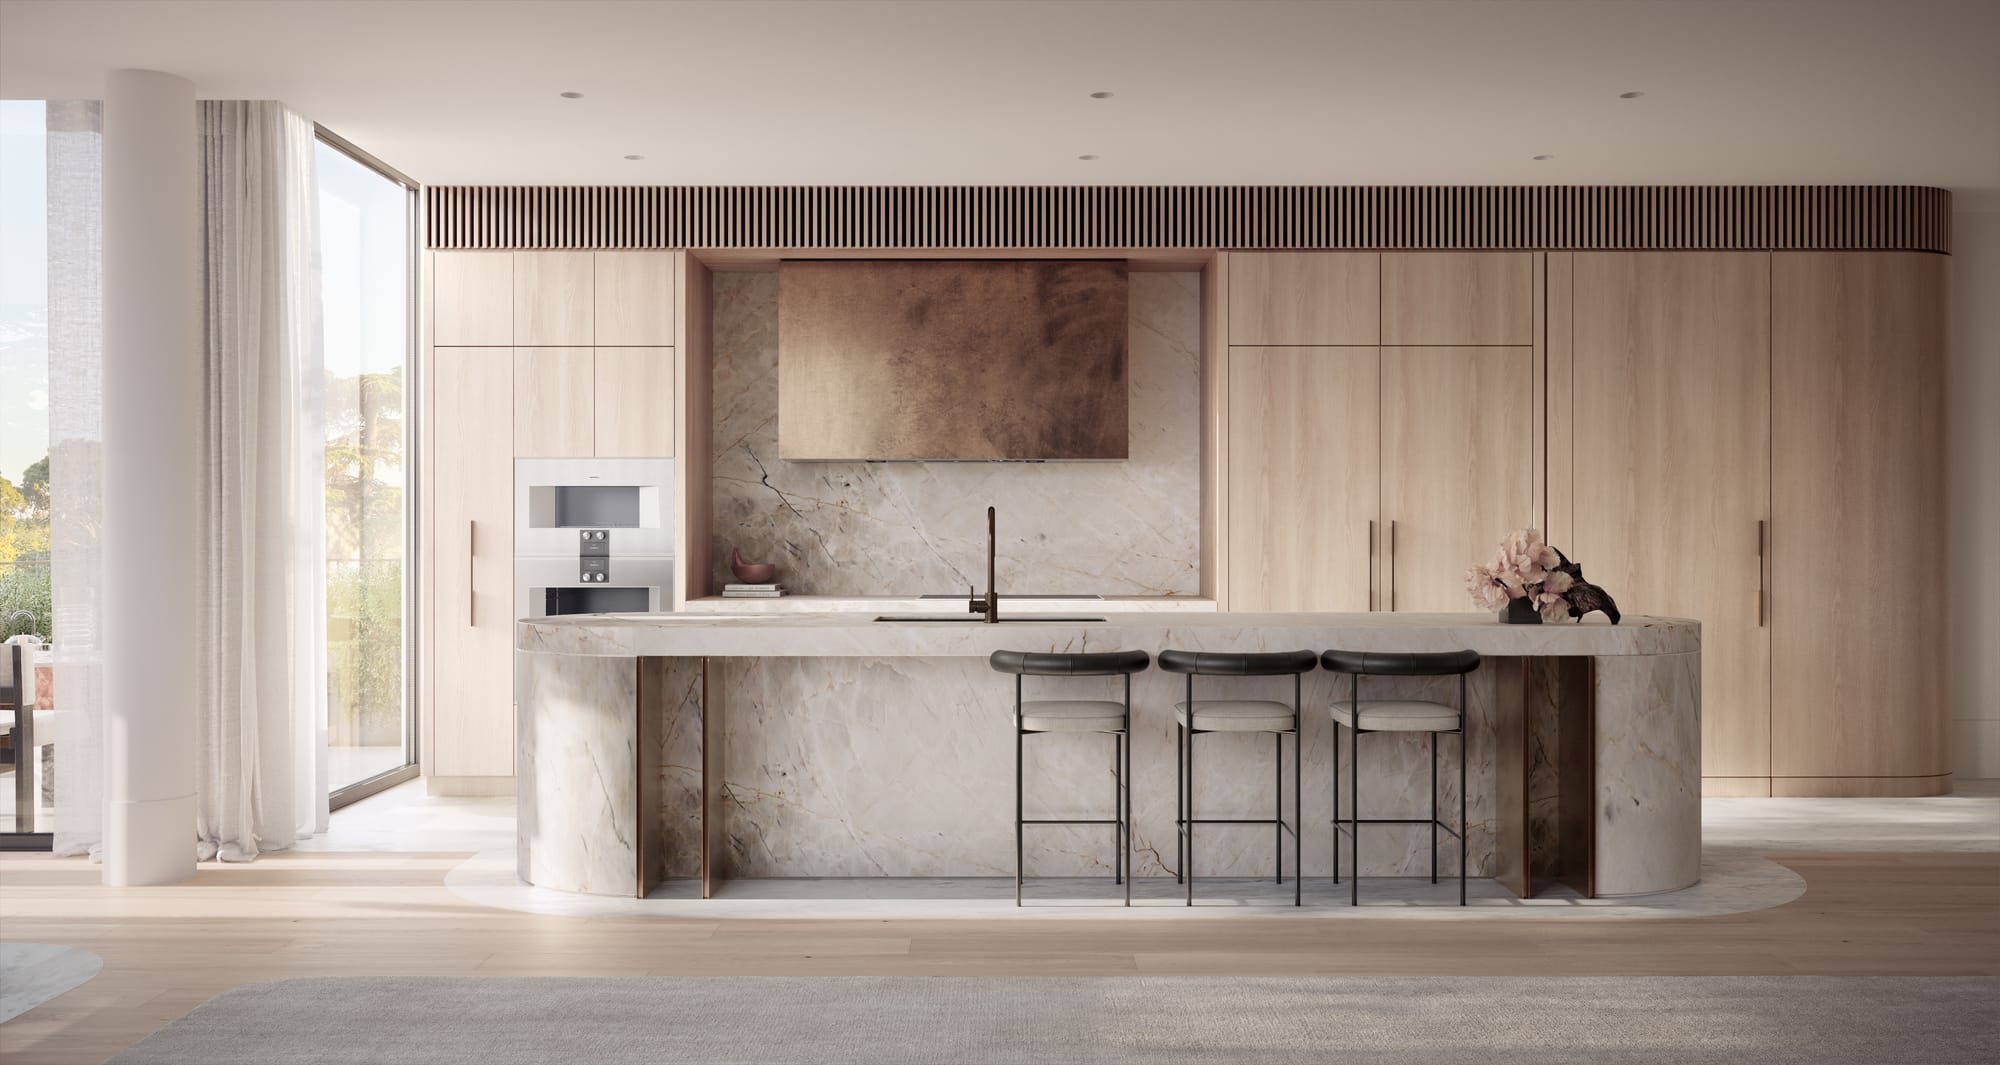 Sculpt Hawthorn by Mim Design, Parallel Workshop and Jack Merlo. Render copyright of Studio Piper. Kitchen with large stone island bench. Timber cabinetry and flooring. Black metal bar stools. 